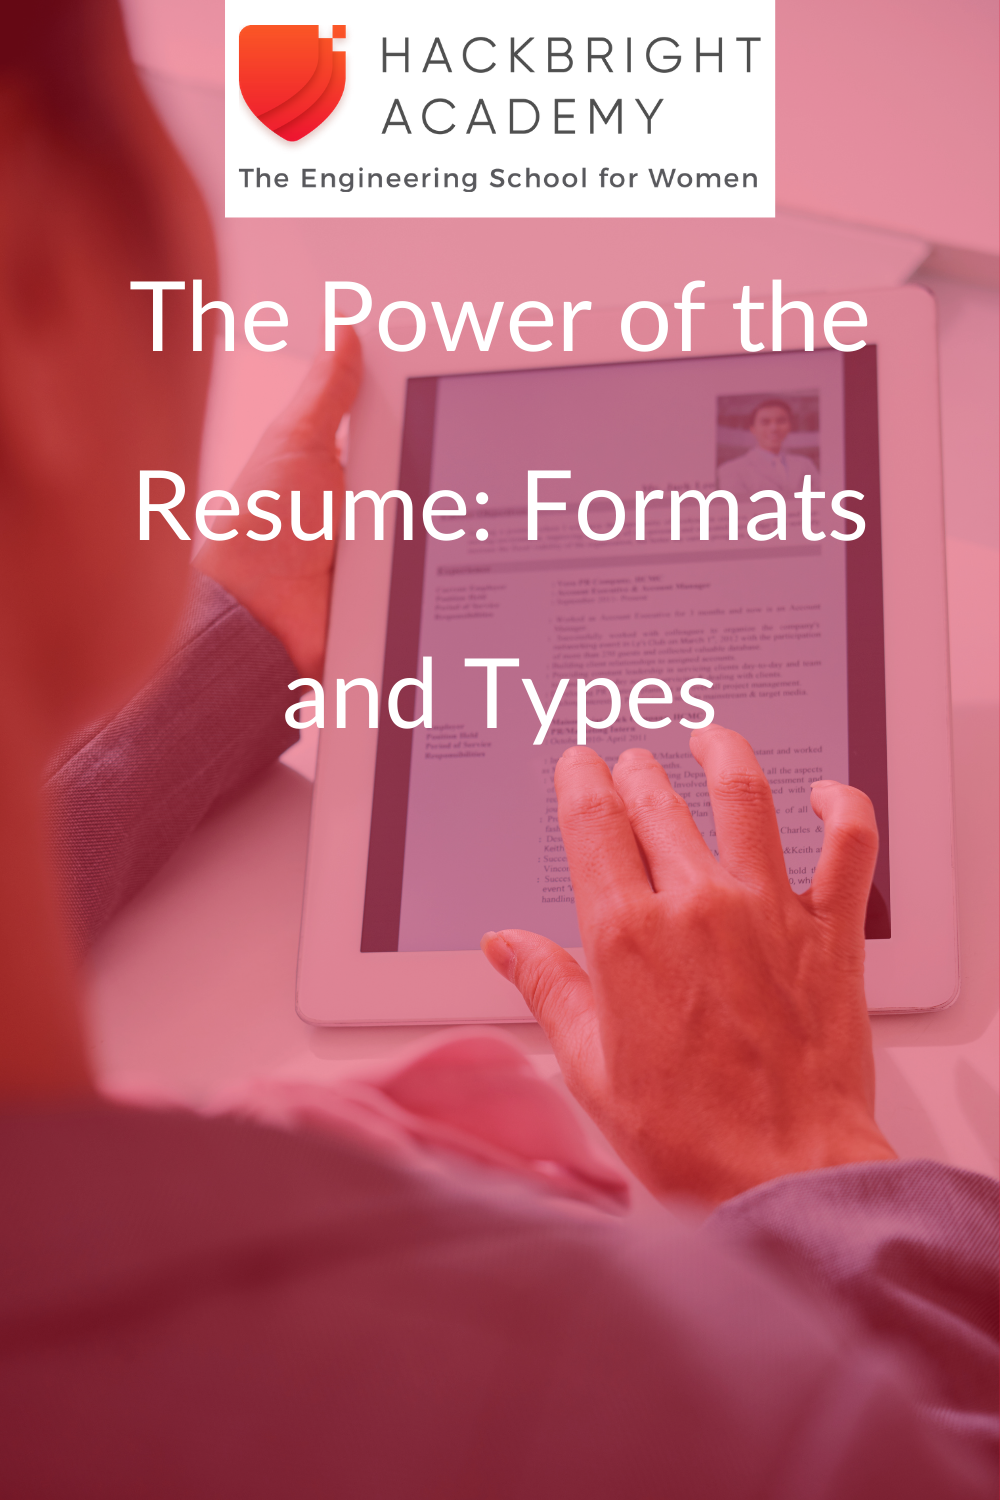 The Power of the Resume: Formats and Types